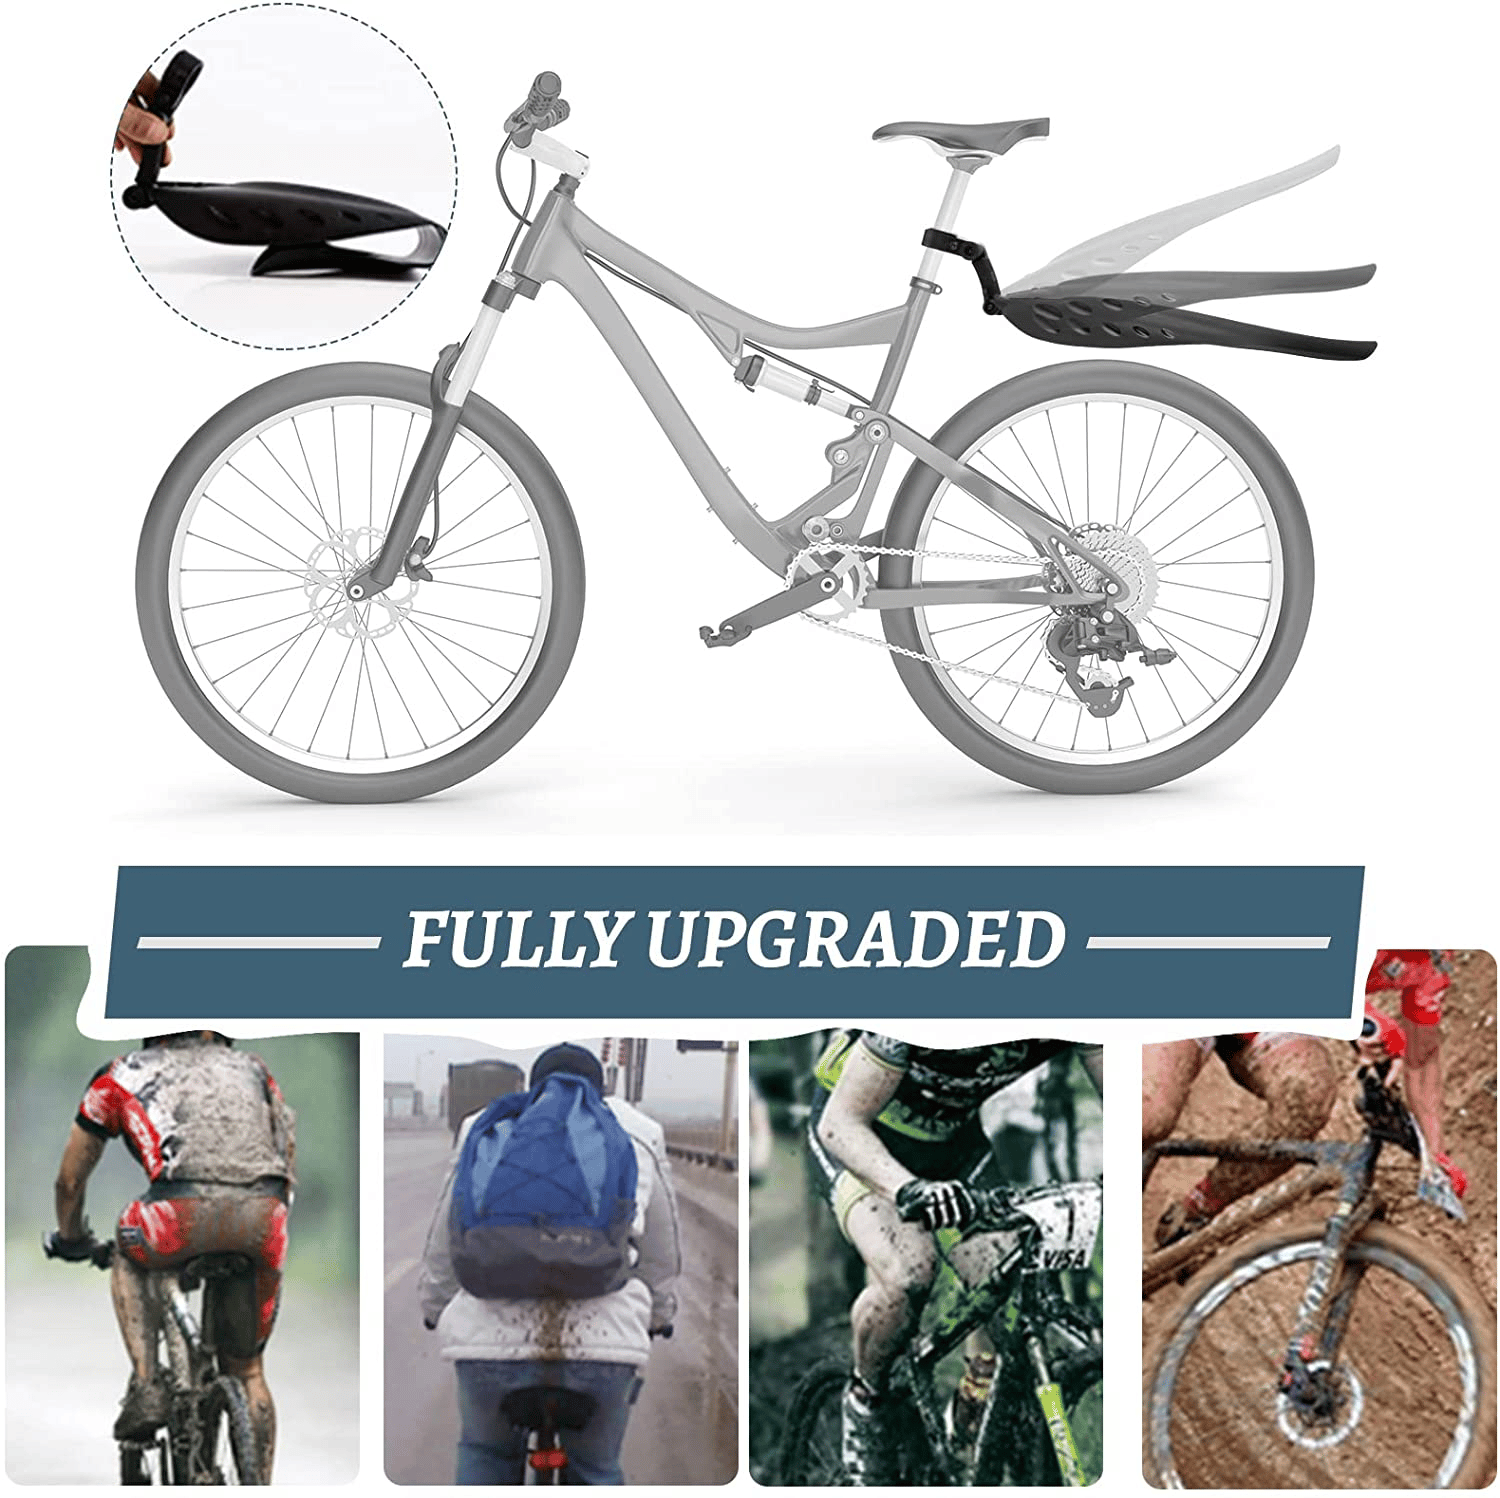 You need to use mountain bike mudguards if you don’t want to get covered in mud when riding on muddy trails.